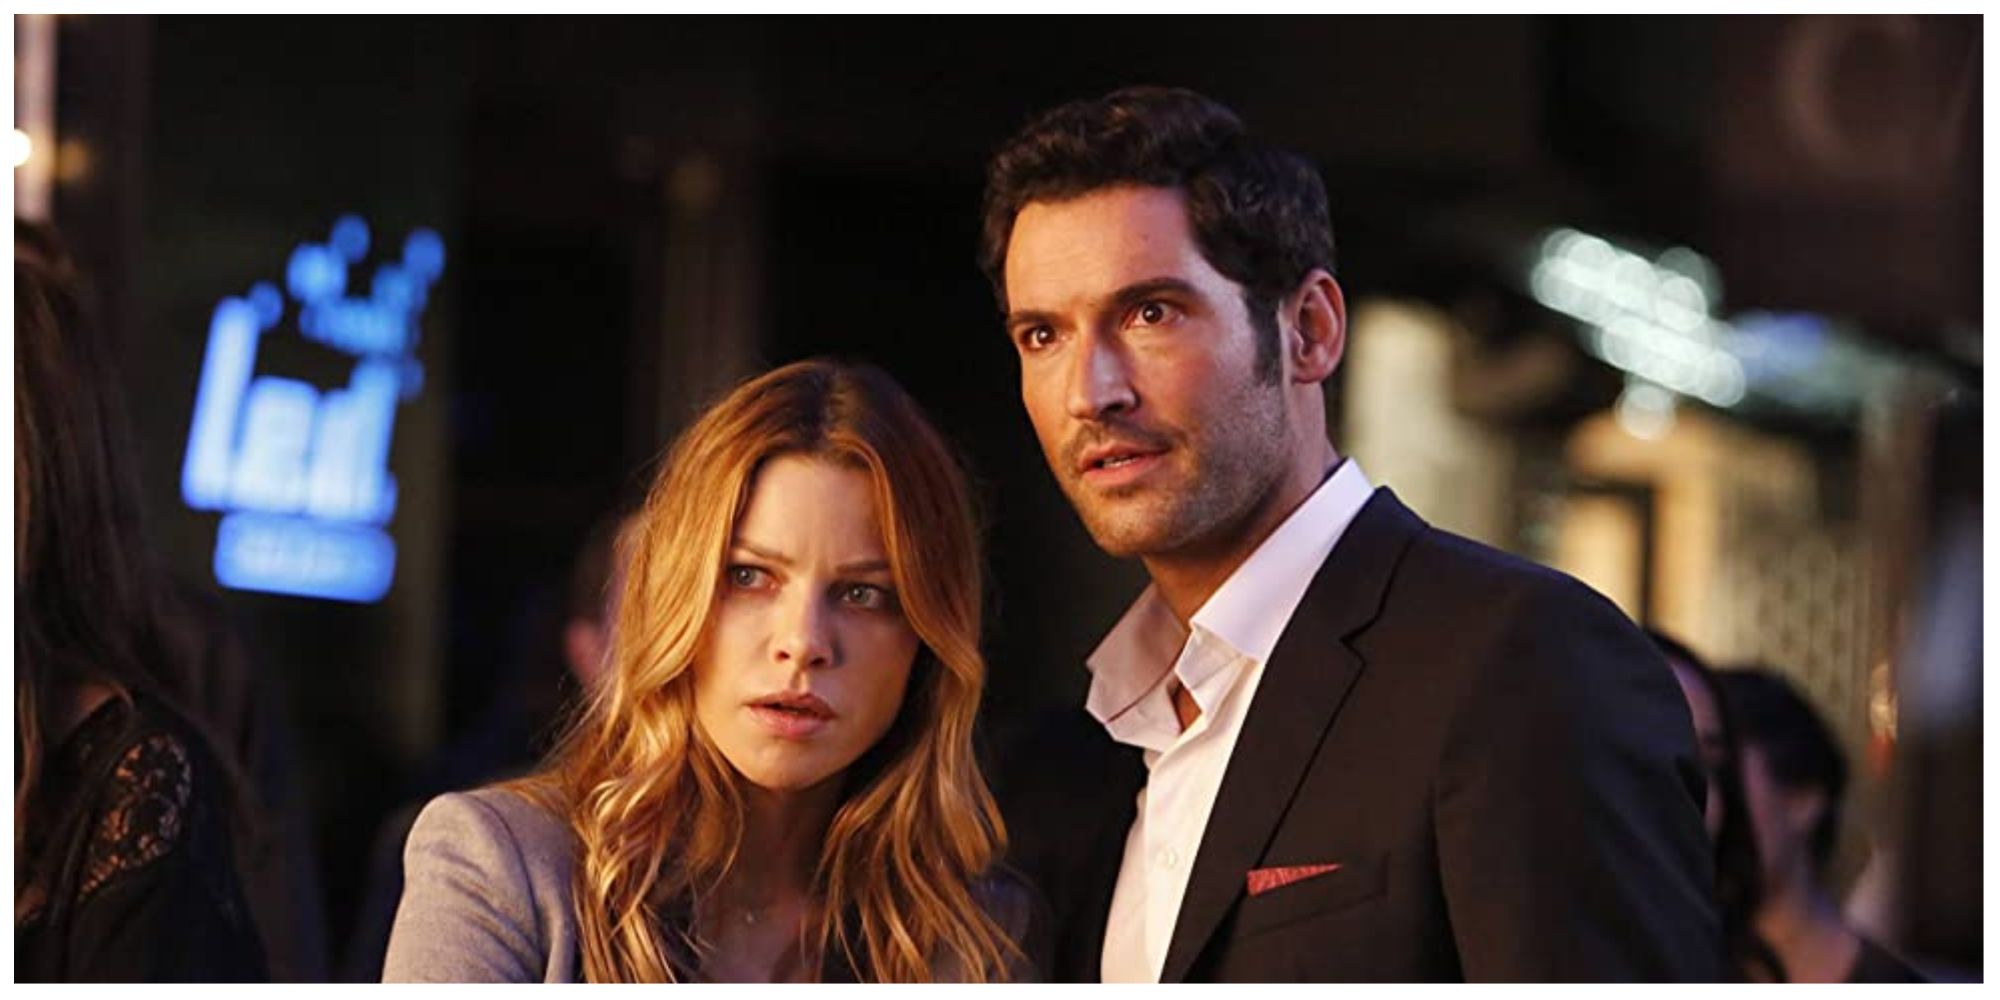 Lucifer standing with Chloe in the hit show Lucifer, as they look concerned with something off screen.